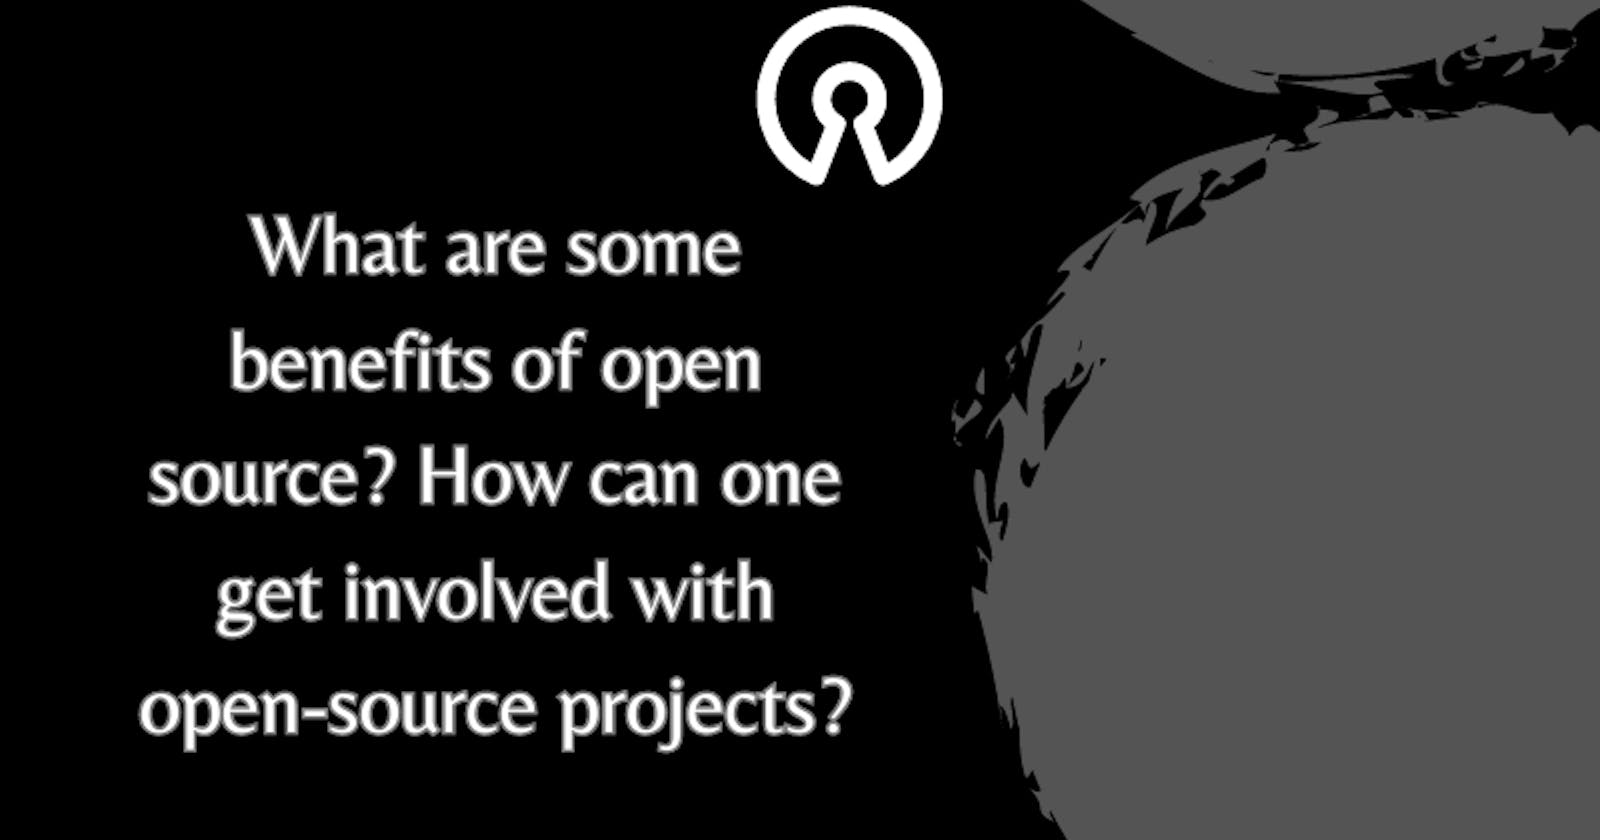 What are some benefits of open source? How can one get involved with open-source projects?